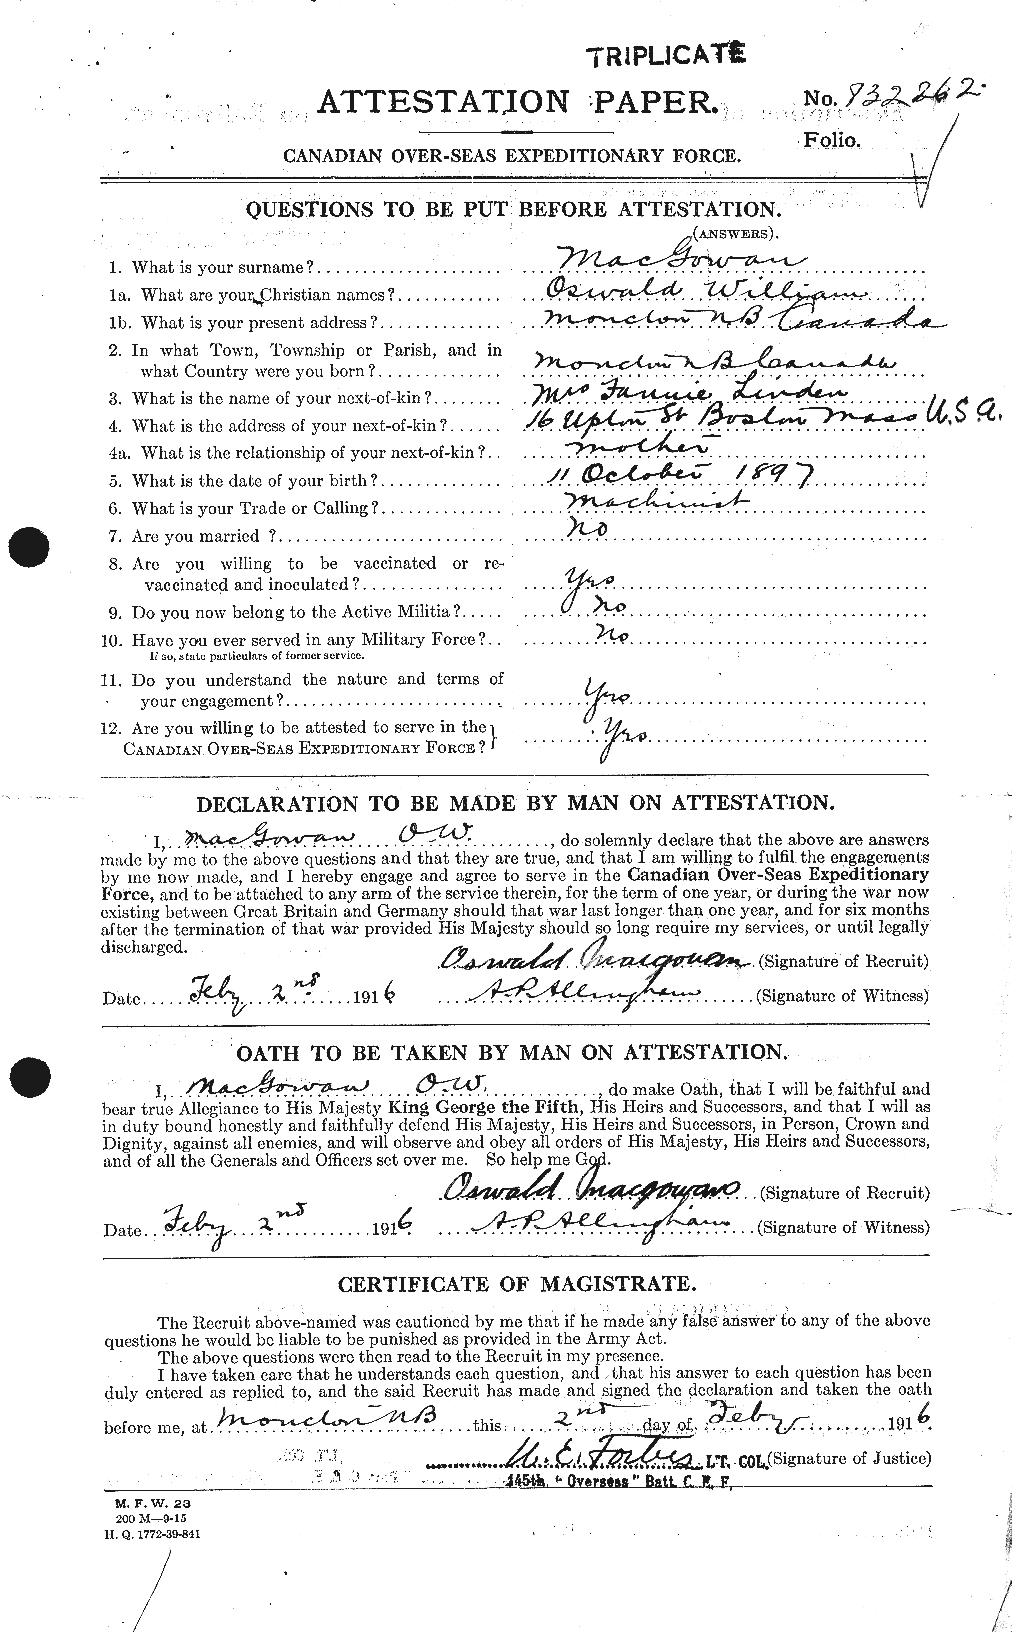 Personnel Records of the First World War - CEF 523196a